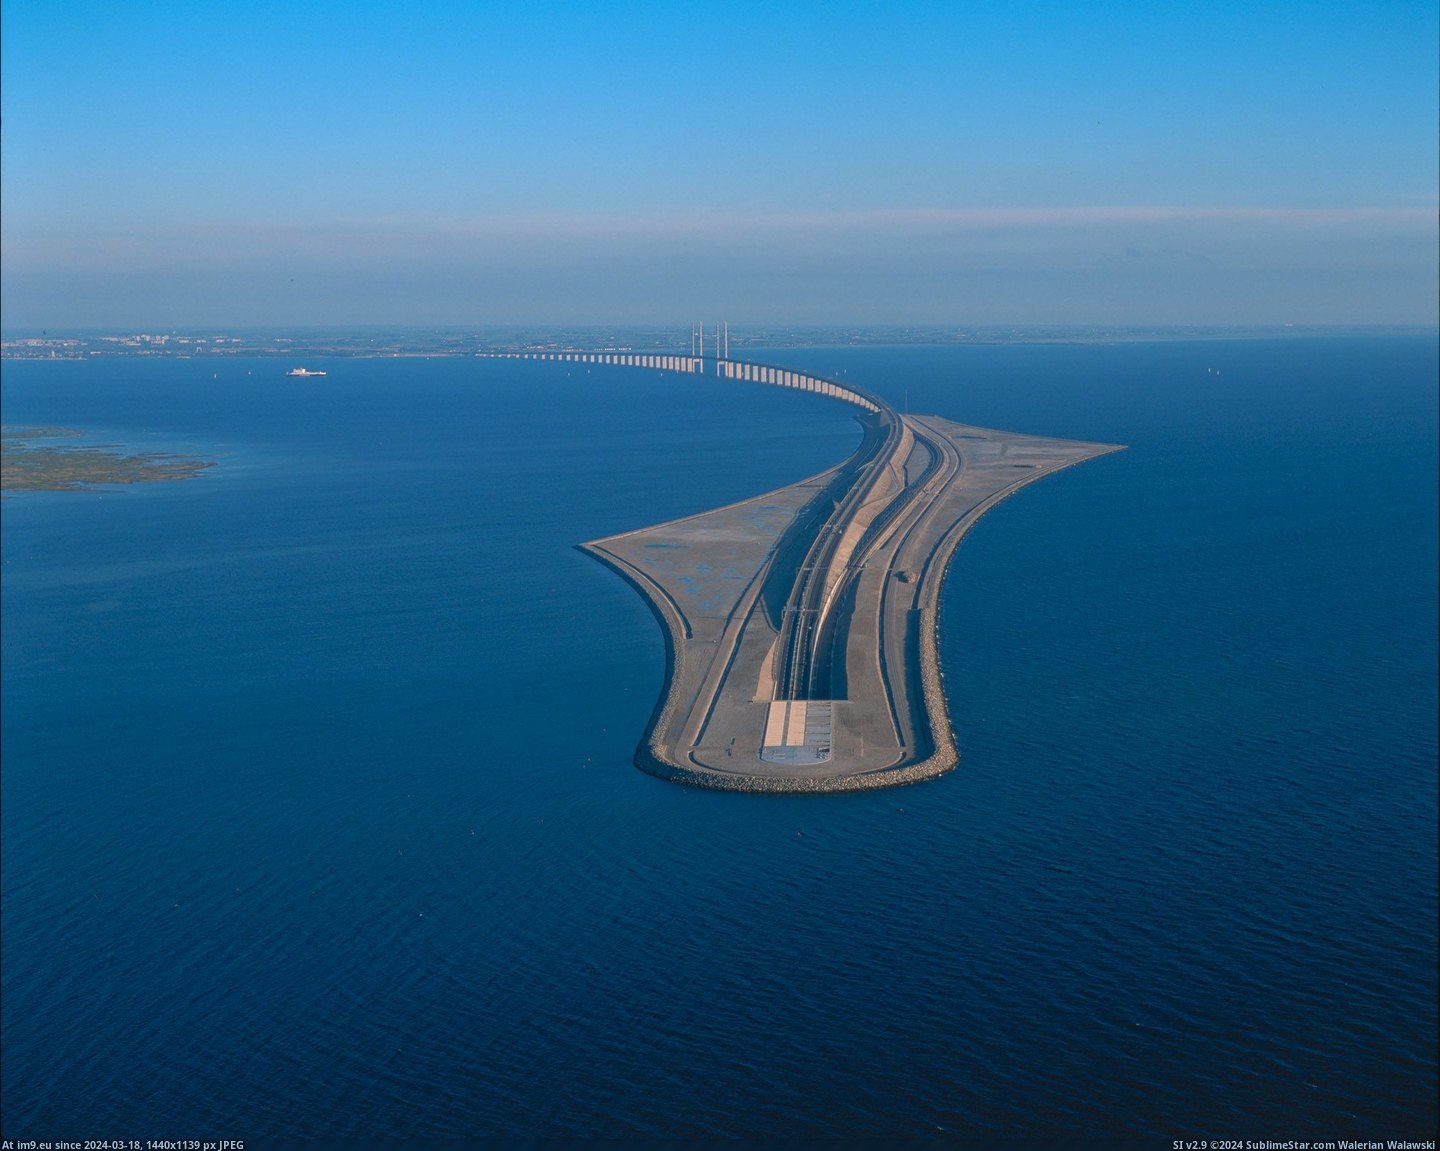 #Bridge #Denmark #Tunnel #Sweden [Pics] The bridge between Denmark and Sweden dips into a tunnel Pic. (Image of album My r/PICS favs))